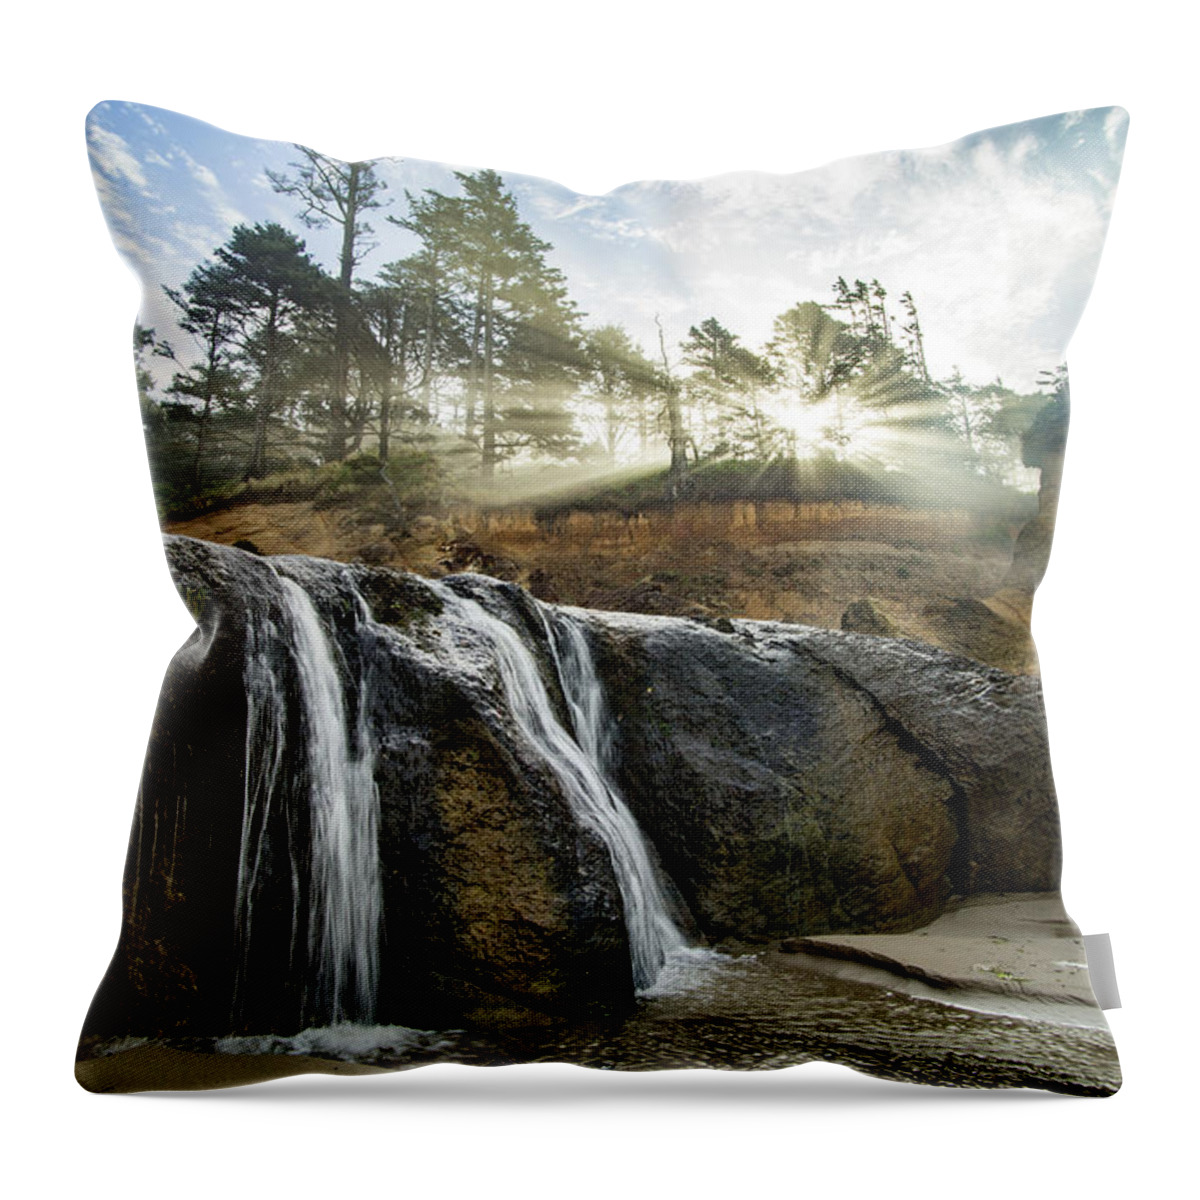 Hug Point Throw Pillow featuring the photograph Hug Point Oregon by Wesley Aston